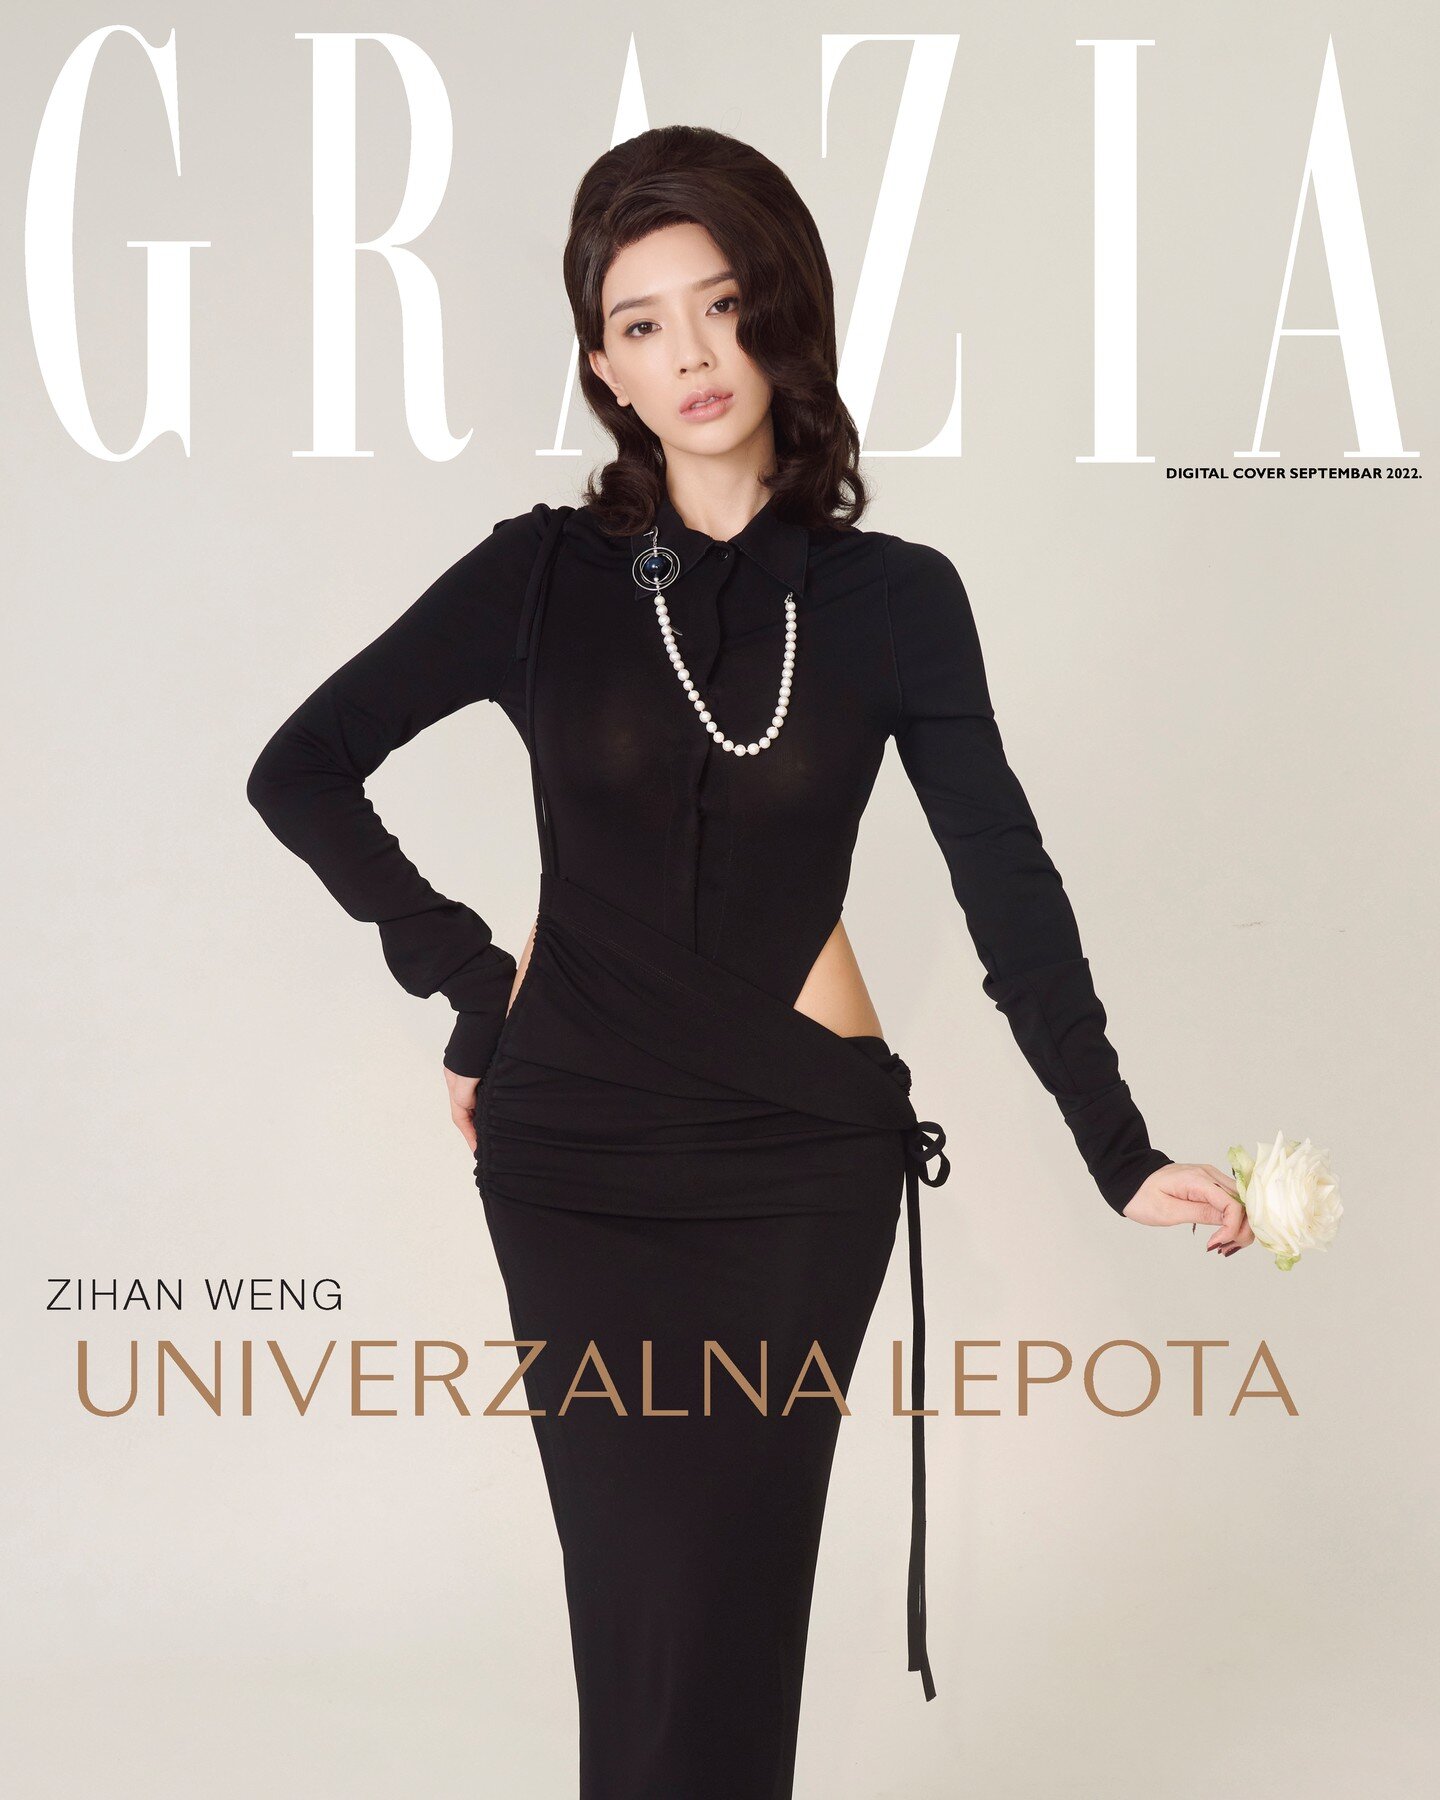 Our September digital cover of Zihan Weng @babe.weng for Grazia Serbia @graziaserbia &ndash; talking about her new floral brand called Zihan Rose @zihan.rose that recently launched on May 20th. Check out the feature cover and interview at https://www